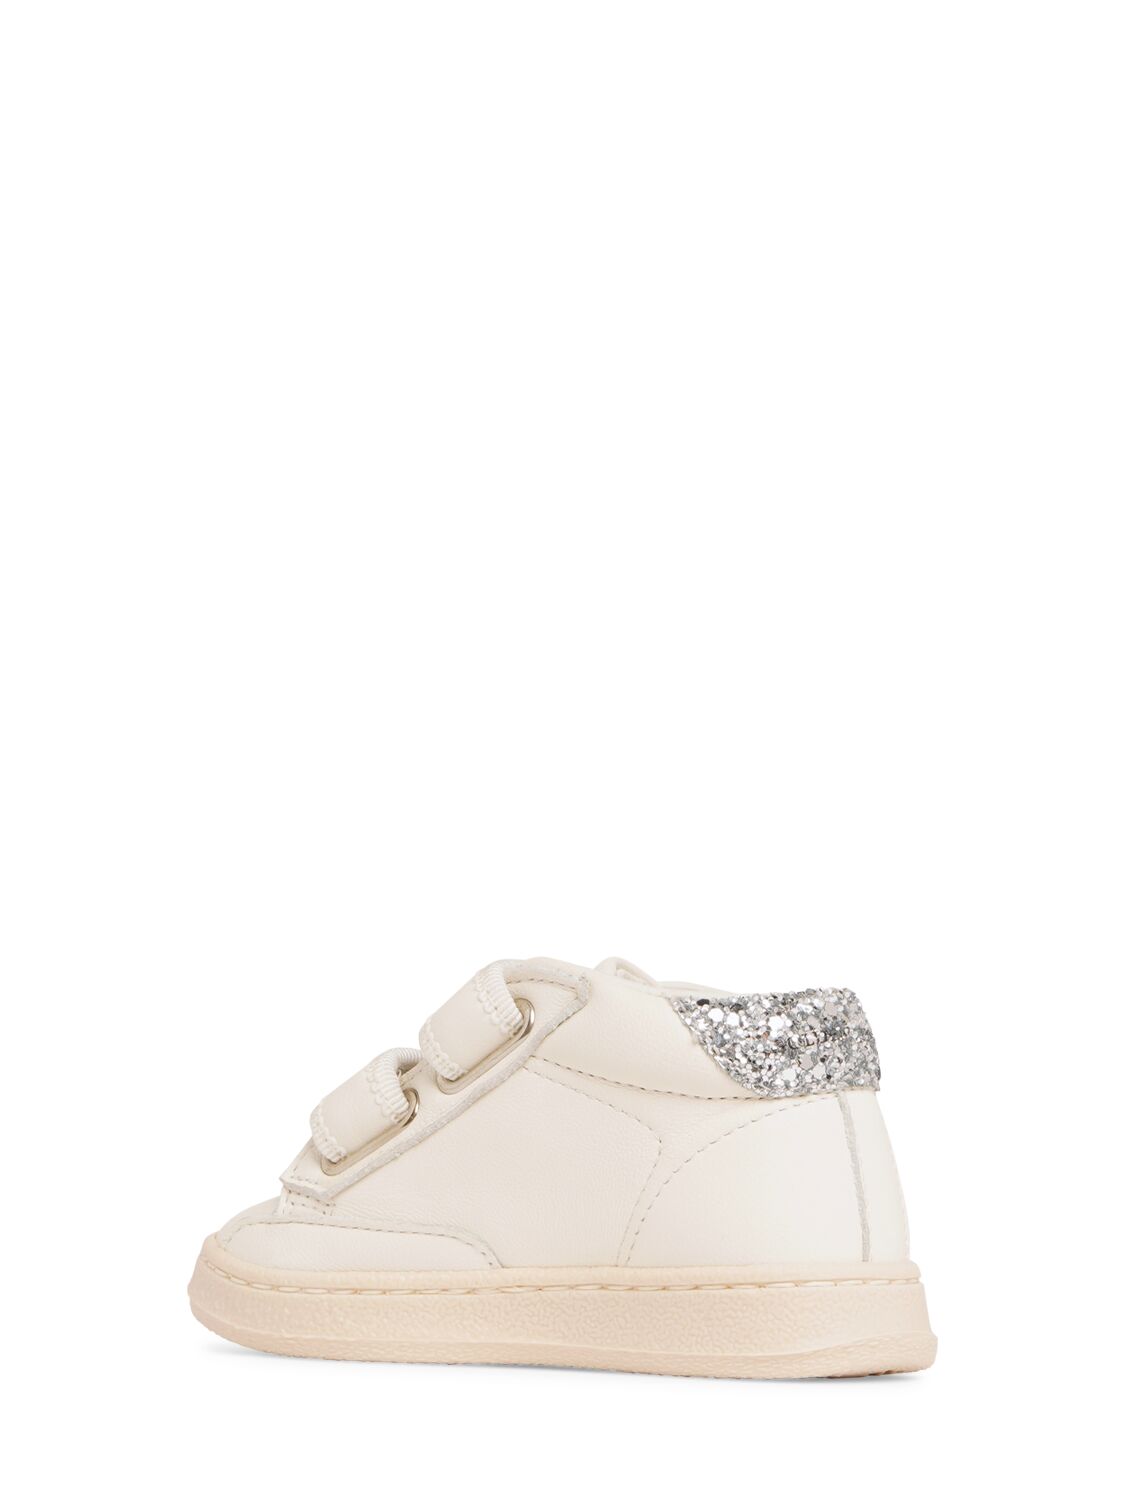 Shop Golden Goose June Glitter Star Strap Leather Sneakers In White,silver